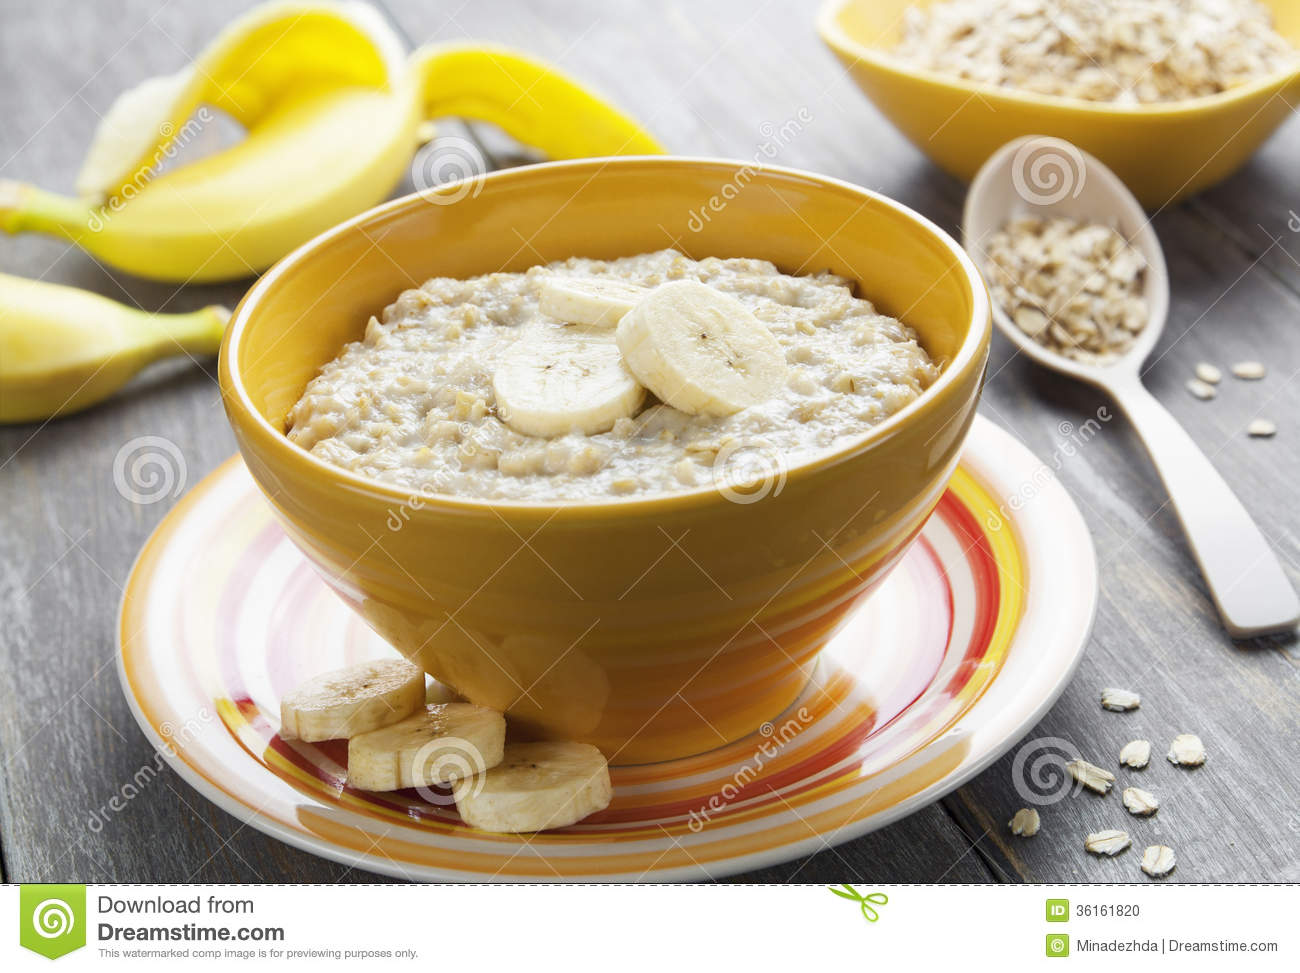 Porridge With Bananas In A Yellow Bowl On The Table